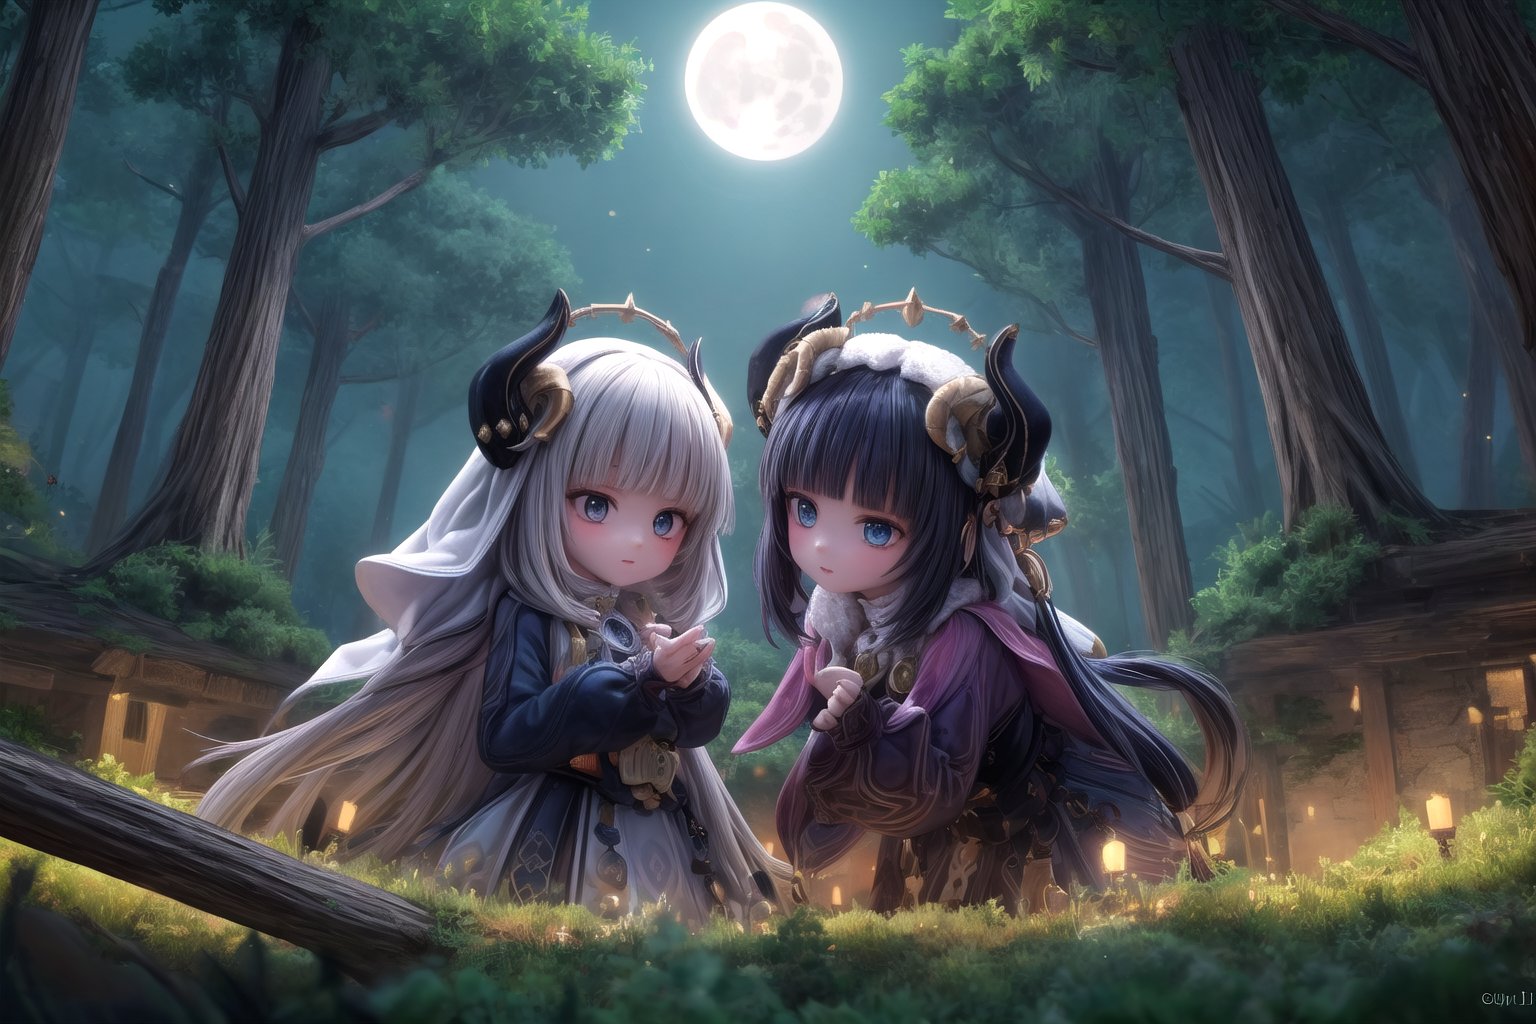 In this breathtaking 32k UHD HDR scene, Yunjindef and Niloudef, two fearless 12-year-old girls, stand strong in a powerful pose amidst the dark, mystical forest of Teyvat. Framed by ancient trees with gnarled branches and eerie vines, they pause at the edge of discovery and peril, their resolute faces aglow with soft luminescence emanating from their hands like tiny beacons. The solemn moon hangs low in the sky, its long shadow creeping across the landscape as they deliberate whether to uncover hidden treasures amidst the lurking darkness.